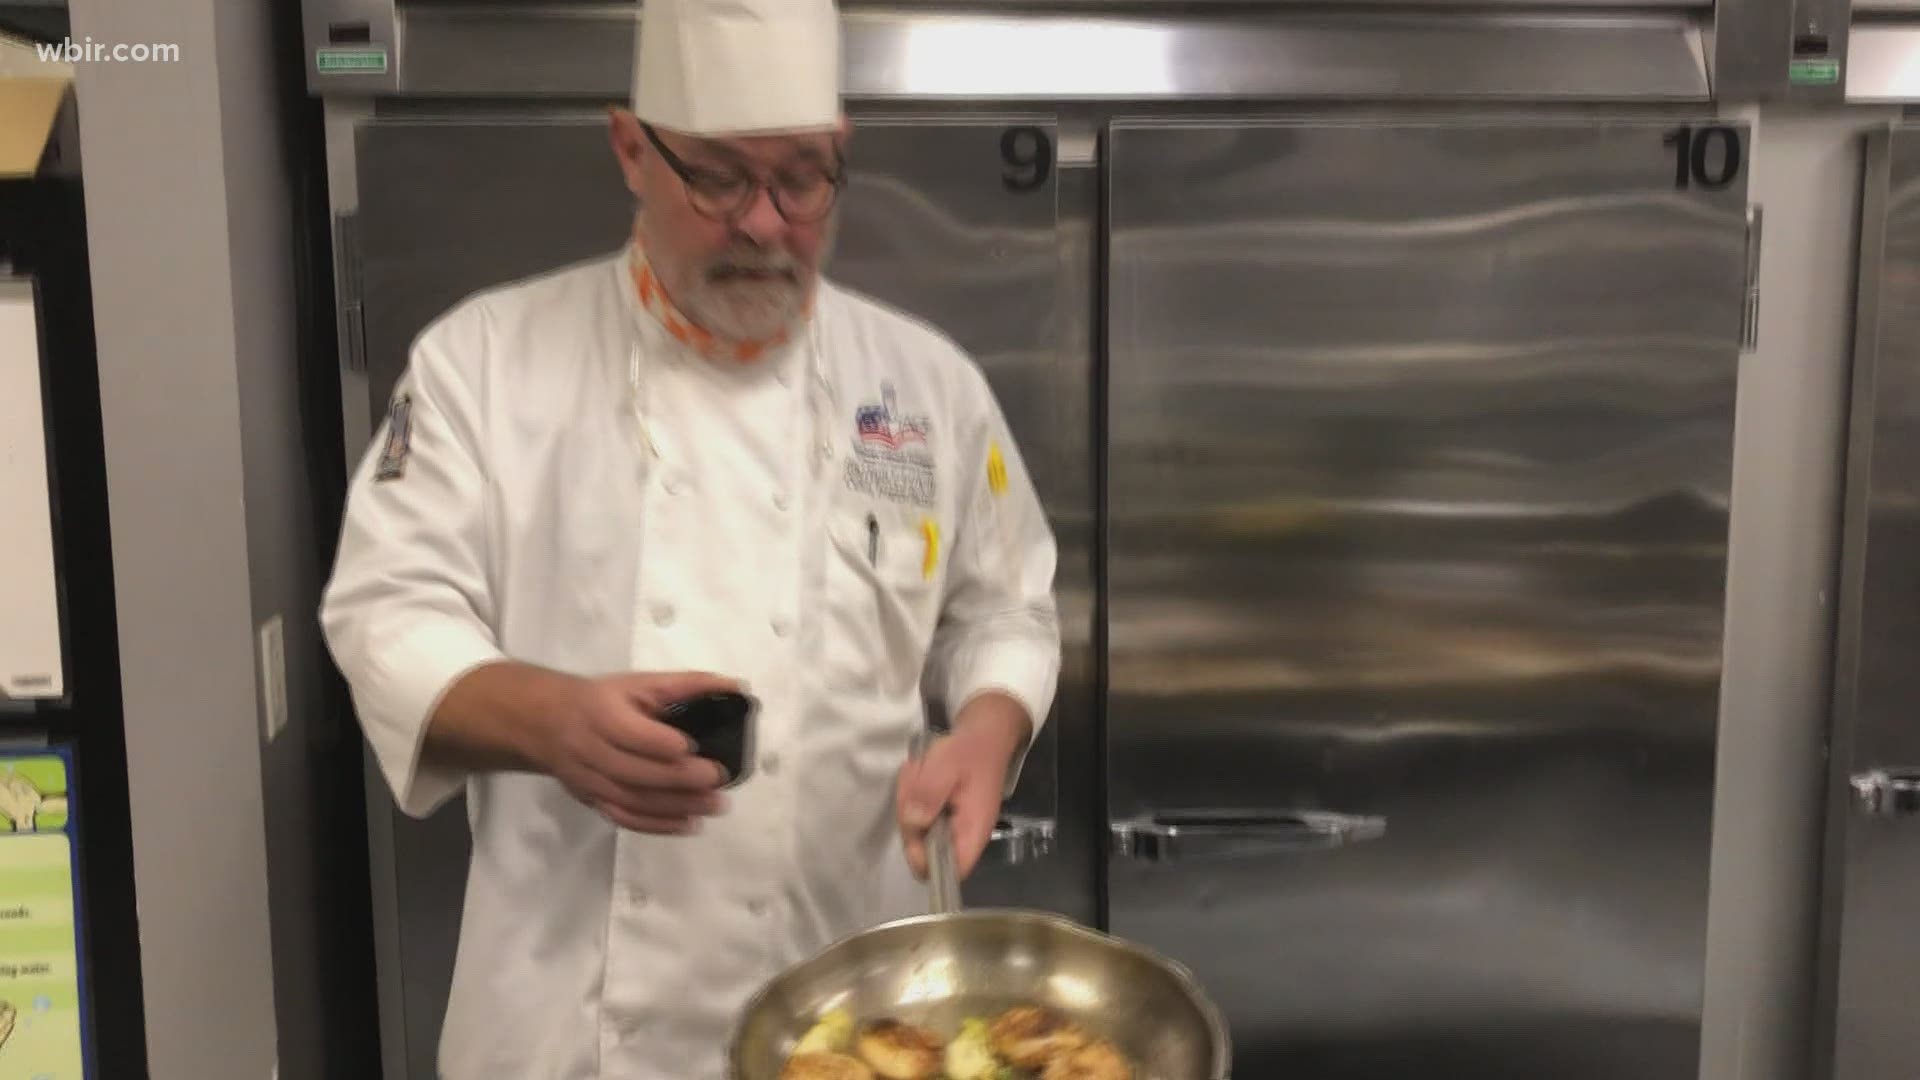 You can become a better cook while helping out the community. The University of Tennessee Culinary and Catering Program is holding a virtual fundraiser.